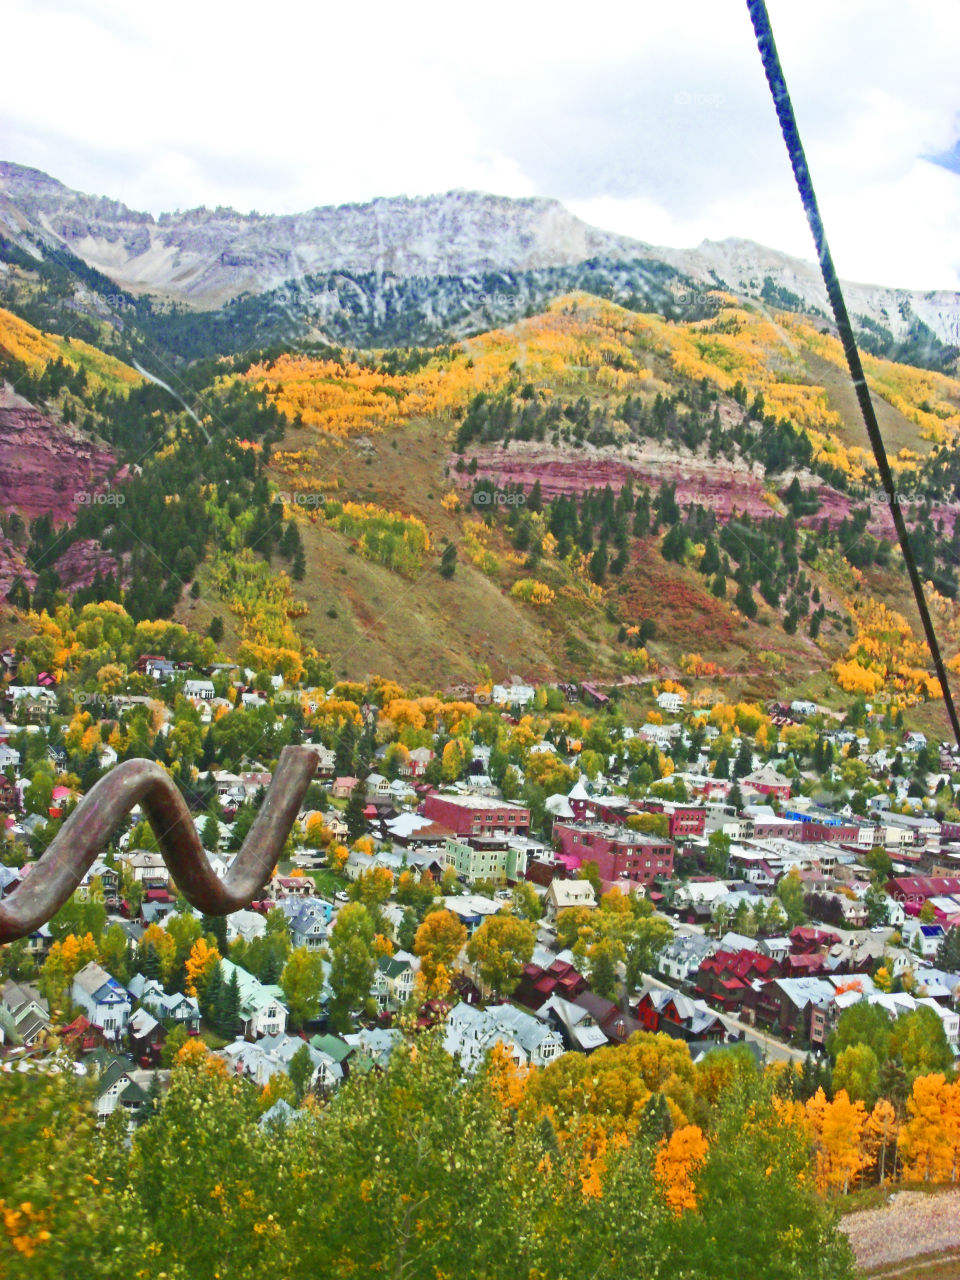 View overlooking Telluride from tram in fall.